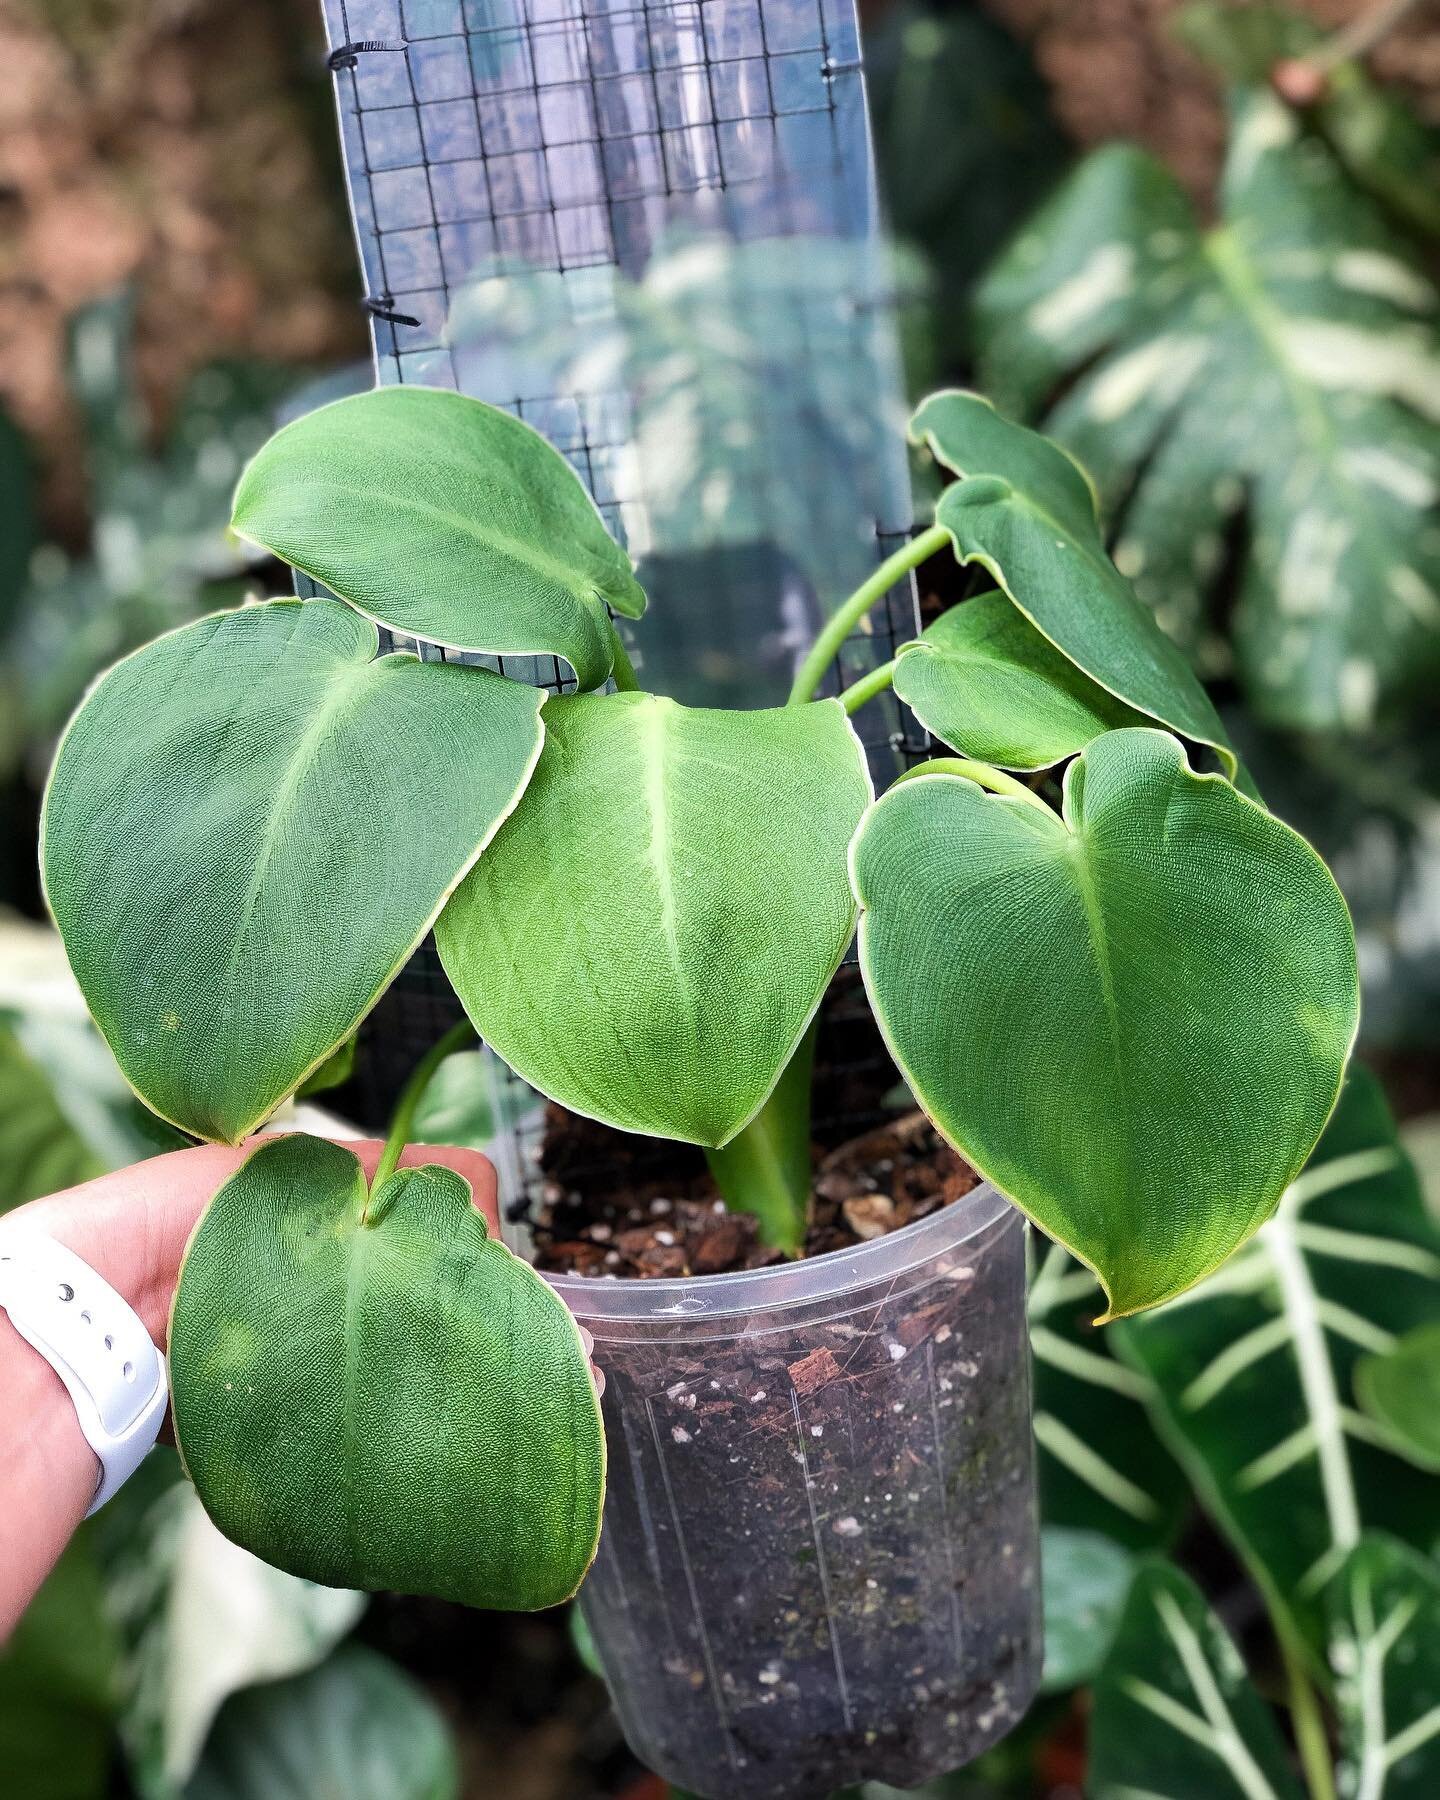 Oink oink 🐷

P H I L O D E N D R O N
R U G O S U M

Aka the &lsquo;Pig Skin&rsquo; Philodendron
She thiccccc&hellip;
She textured&hellip;
She heart shaped 💚
And she&rsquo;s currently loving her @grow.vertical pole

Have you tried a Grow Vertical Po